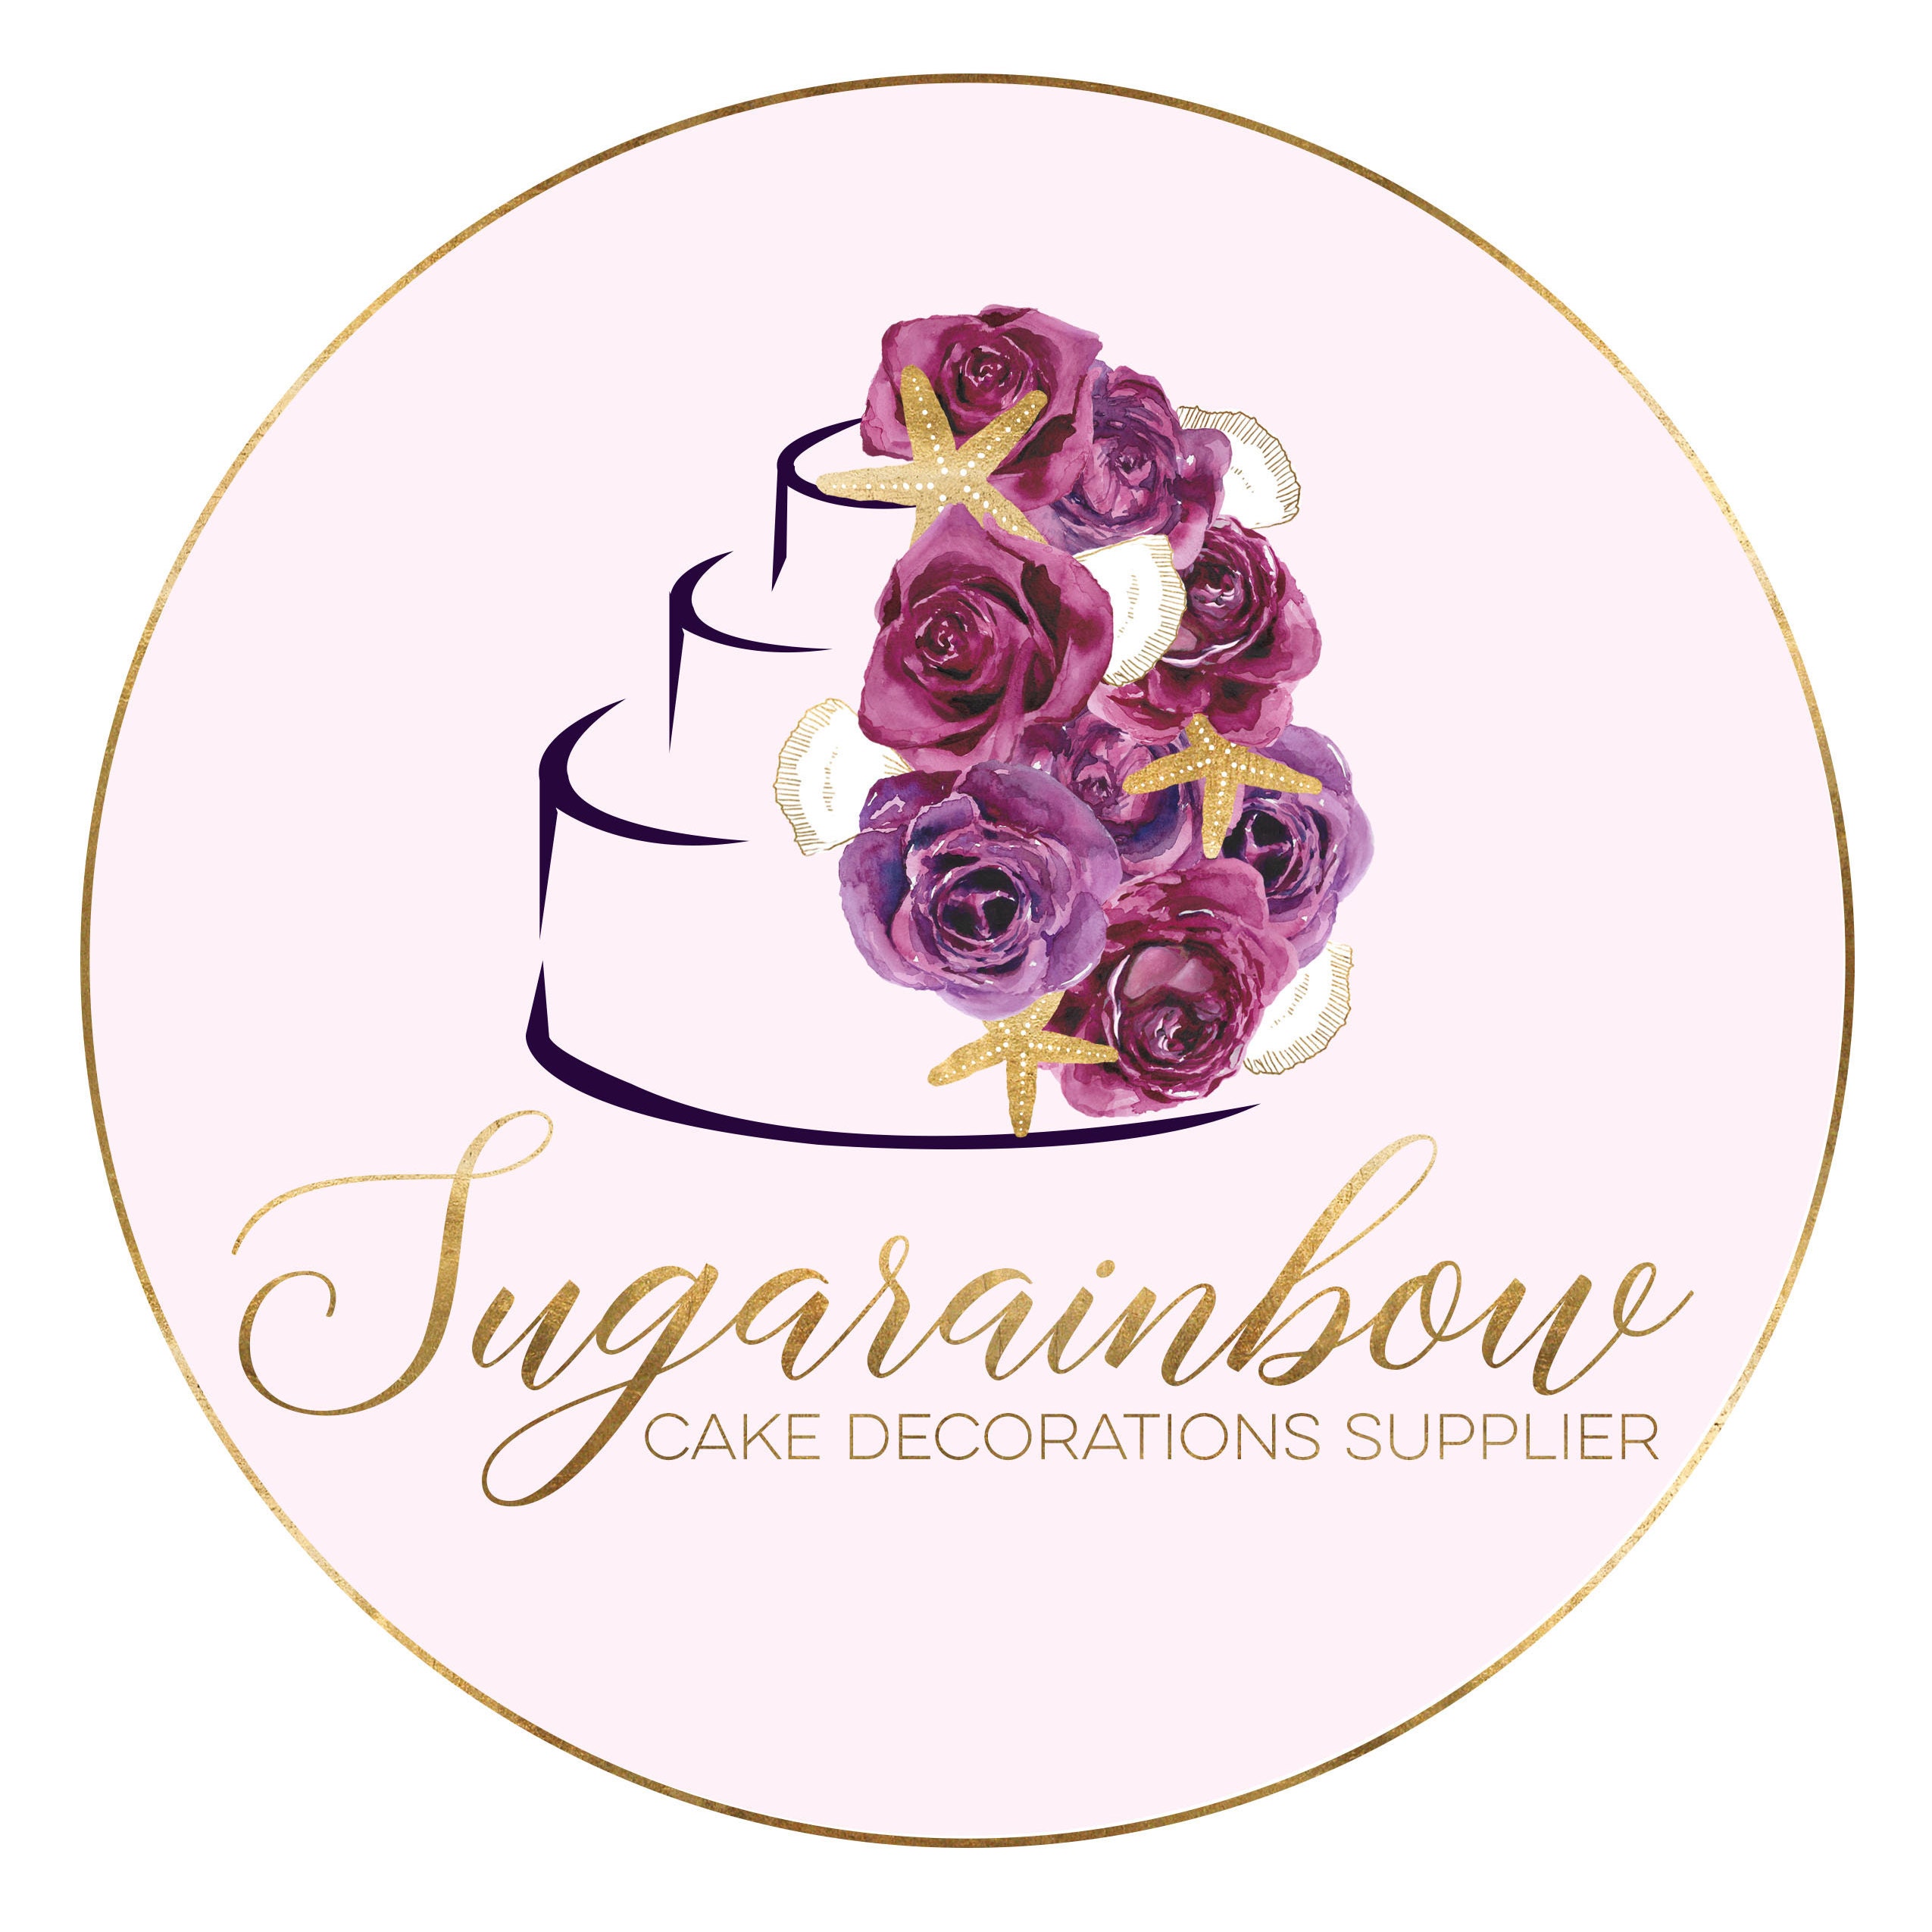 CAKE DECORATIONS SUPPLIER By Sugarainbow On Etsy